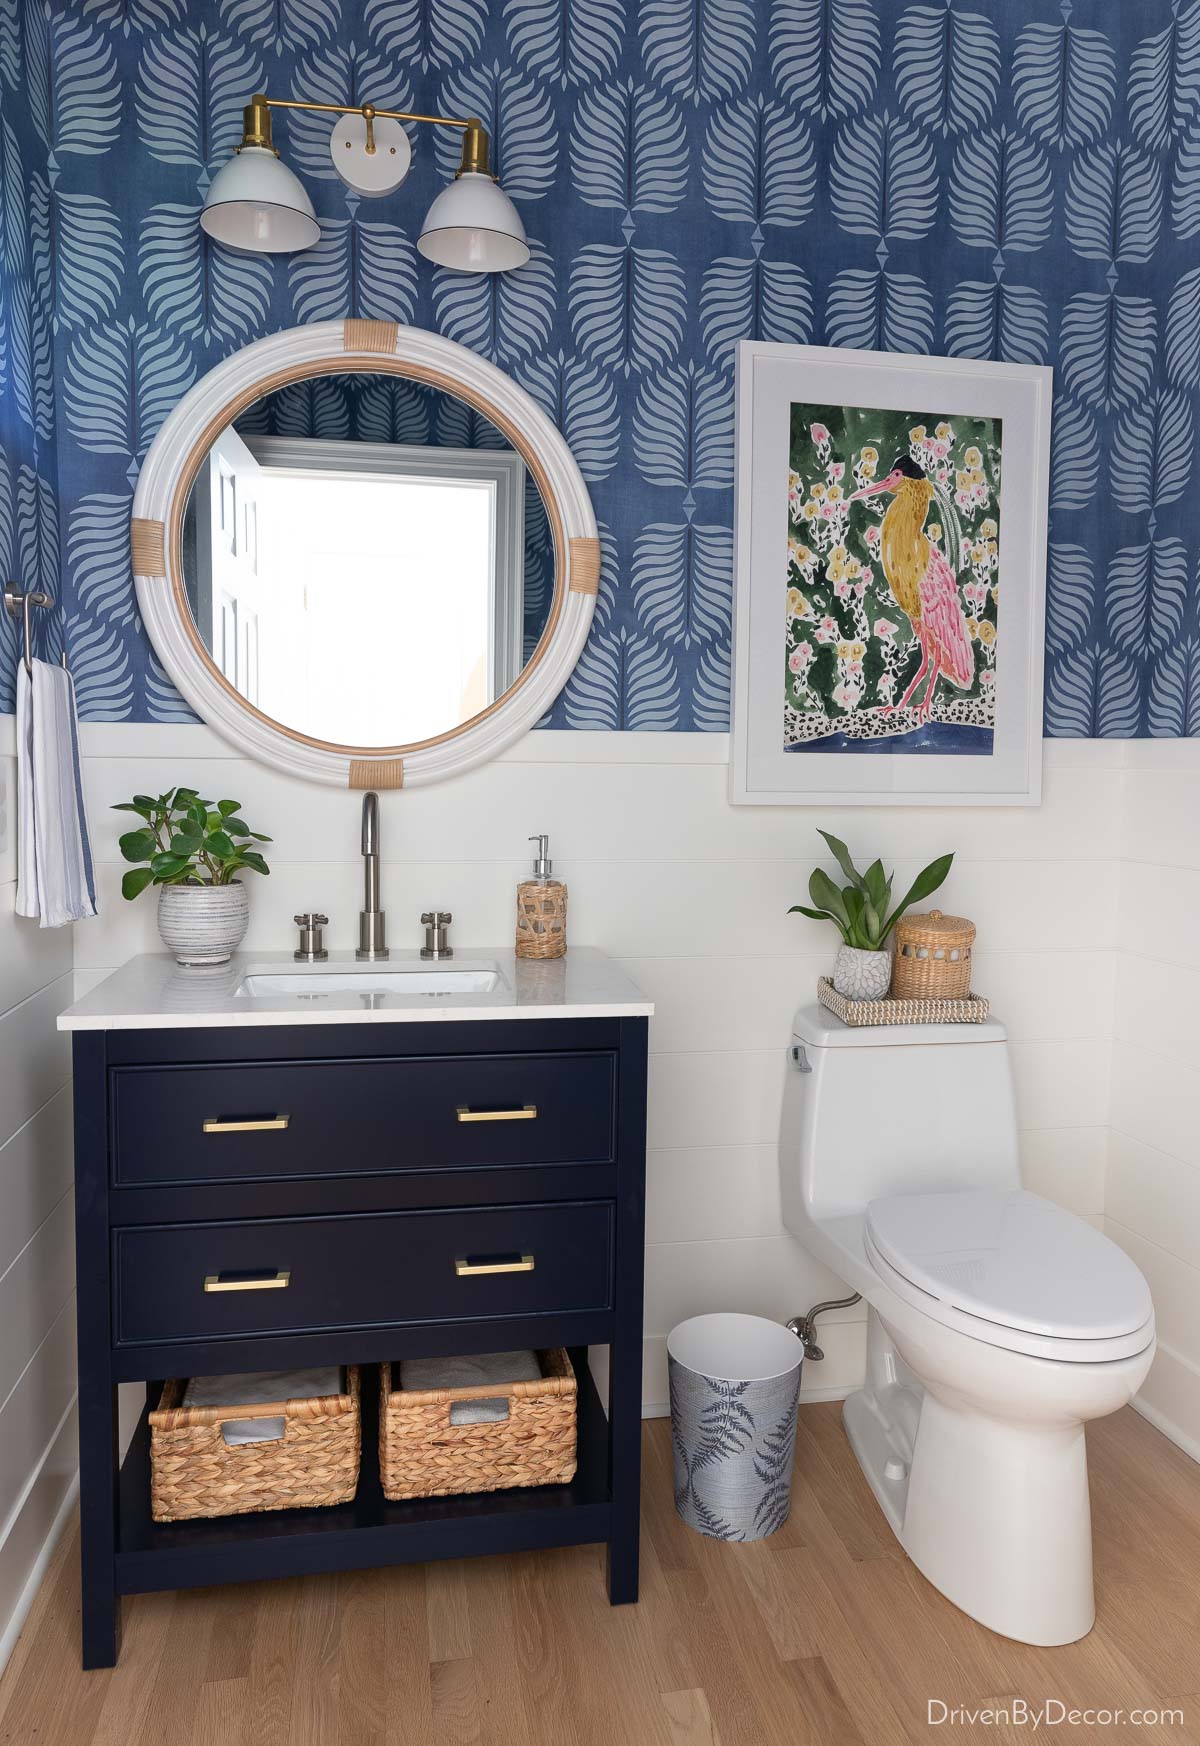 Our powder room with blue wallpaper